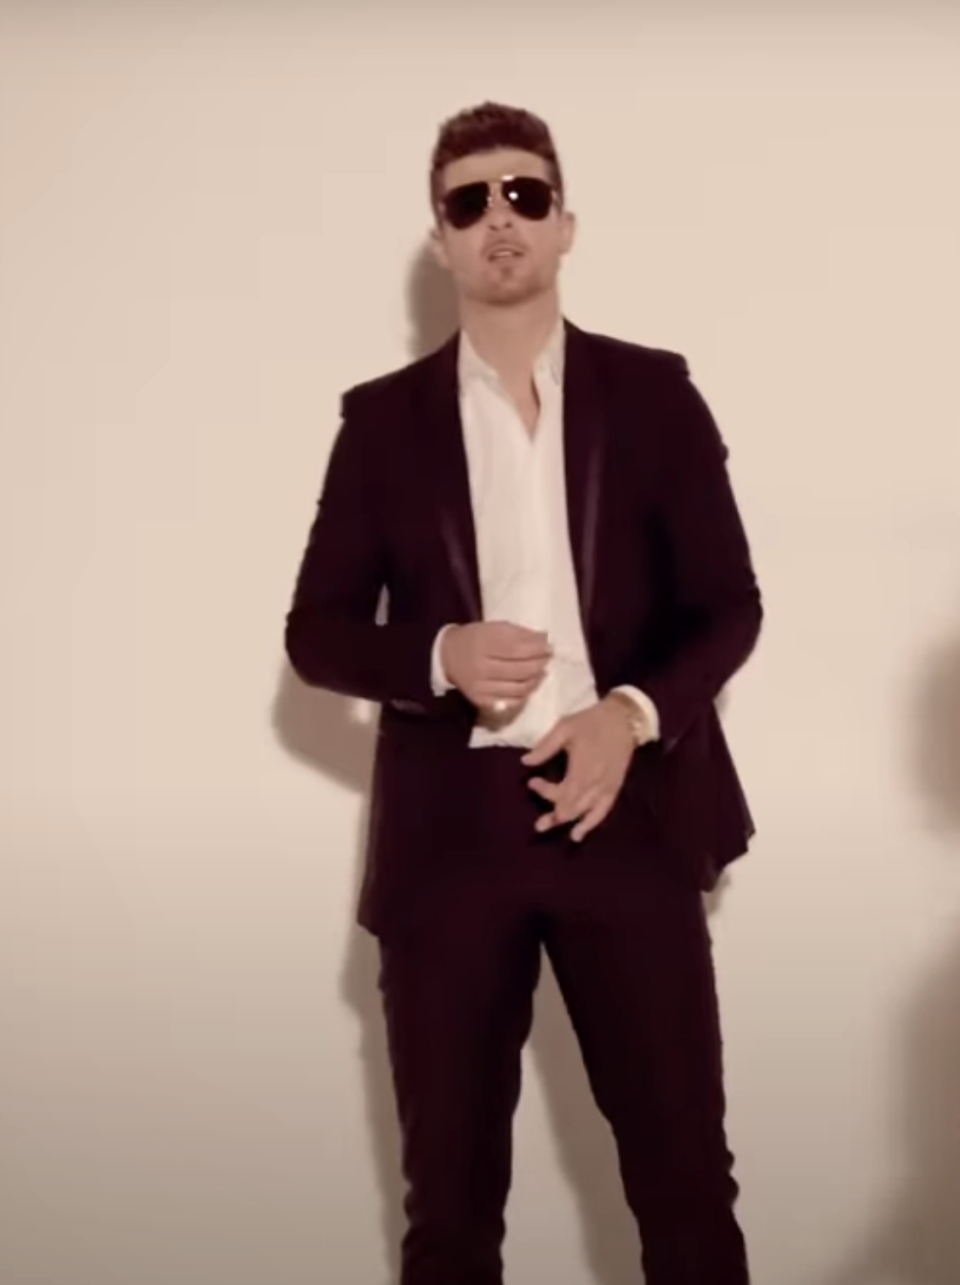 Robin Thicke in dark suit and sunglasses poses against a wall